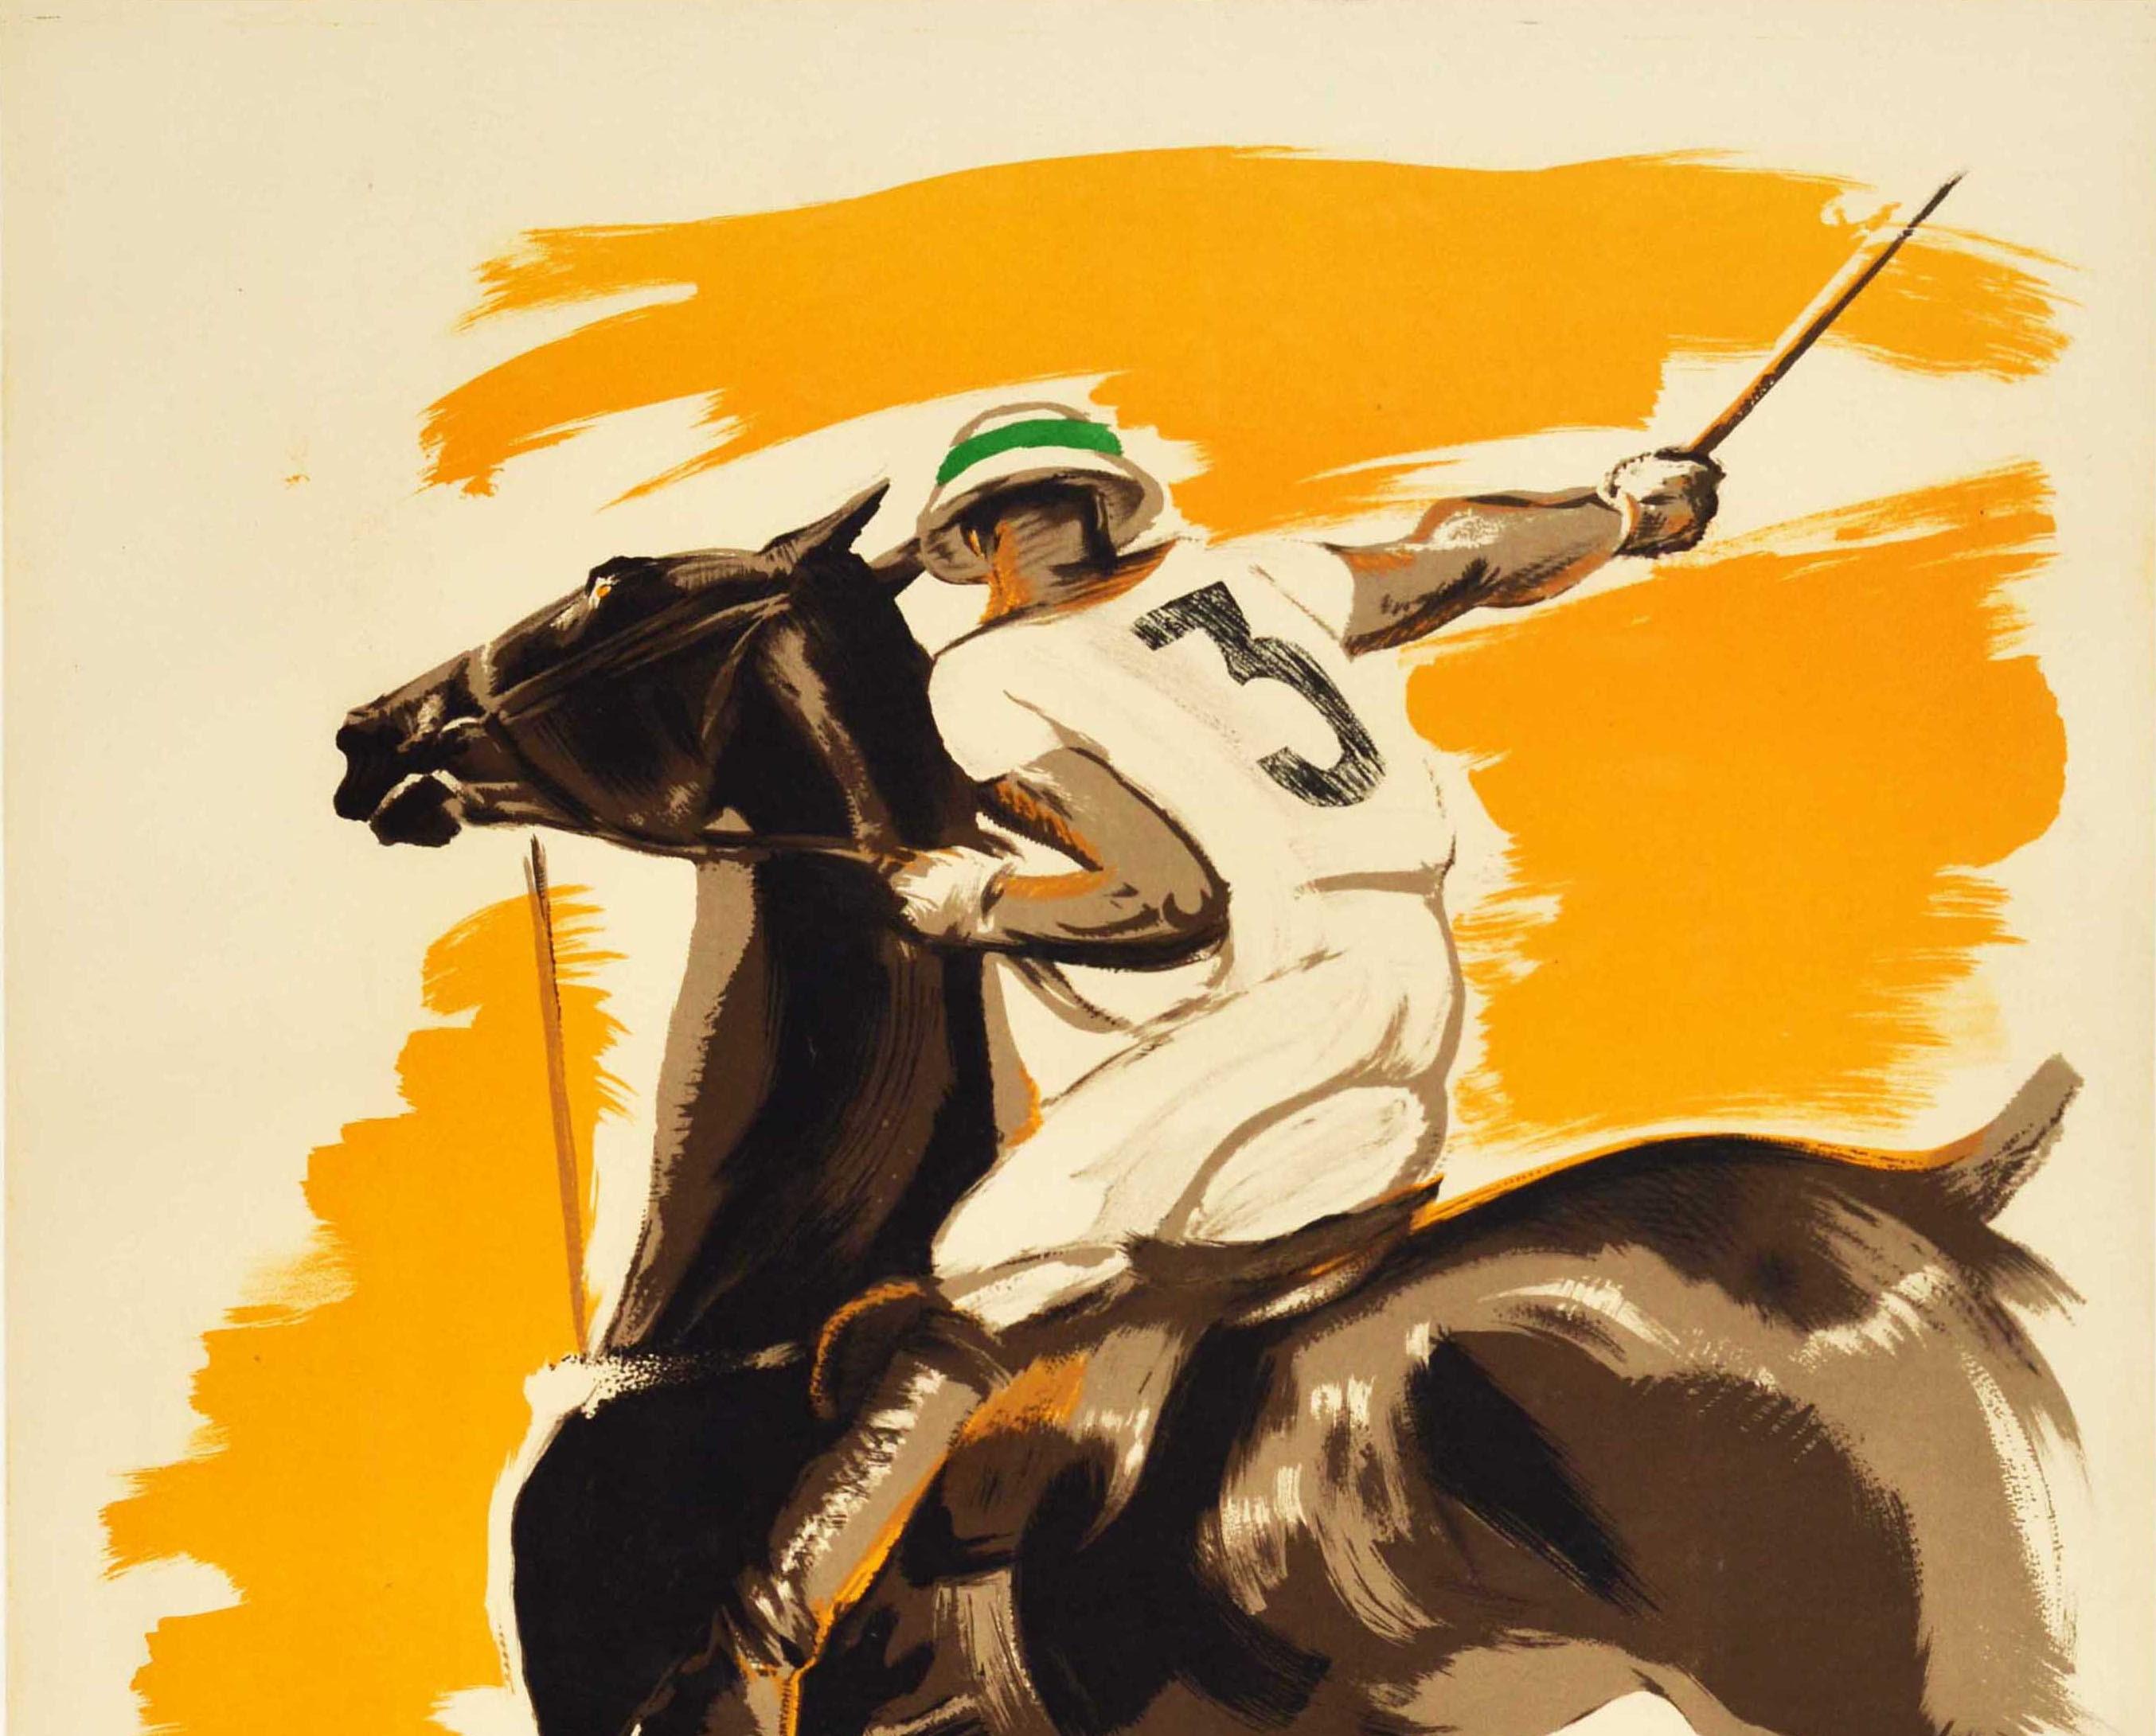 Original vintage sport poster for the annual Deauville Saison De Polo featuring a colourful dynamic image of a polo player wearing a number 3 top and swinging his polo mallet on a horse in the foreground with other players on the grass below the